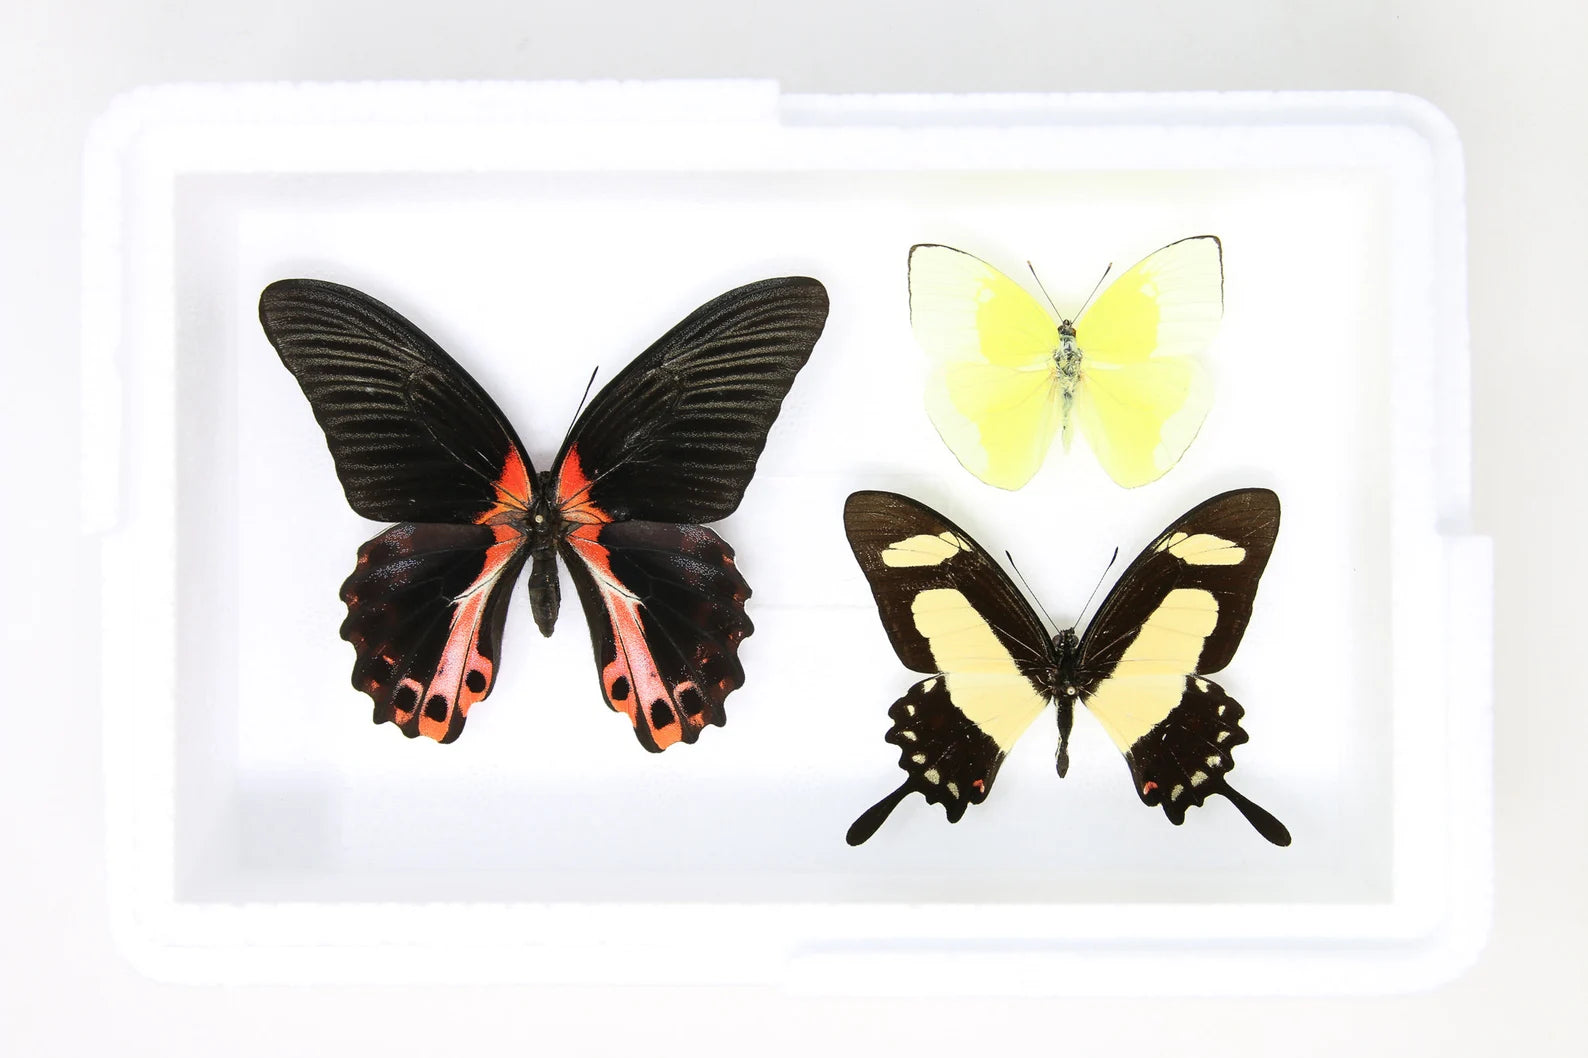 Pinned Tropical Butterflies, A1 Real Butterfly Pinned Set Specimens, Entomology Taxidermy (#BUT90)